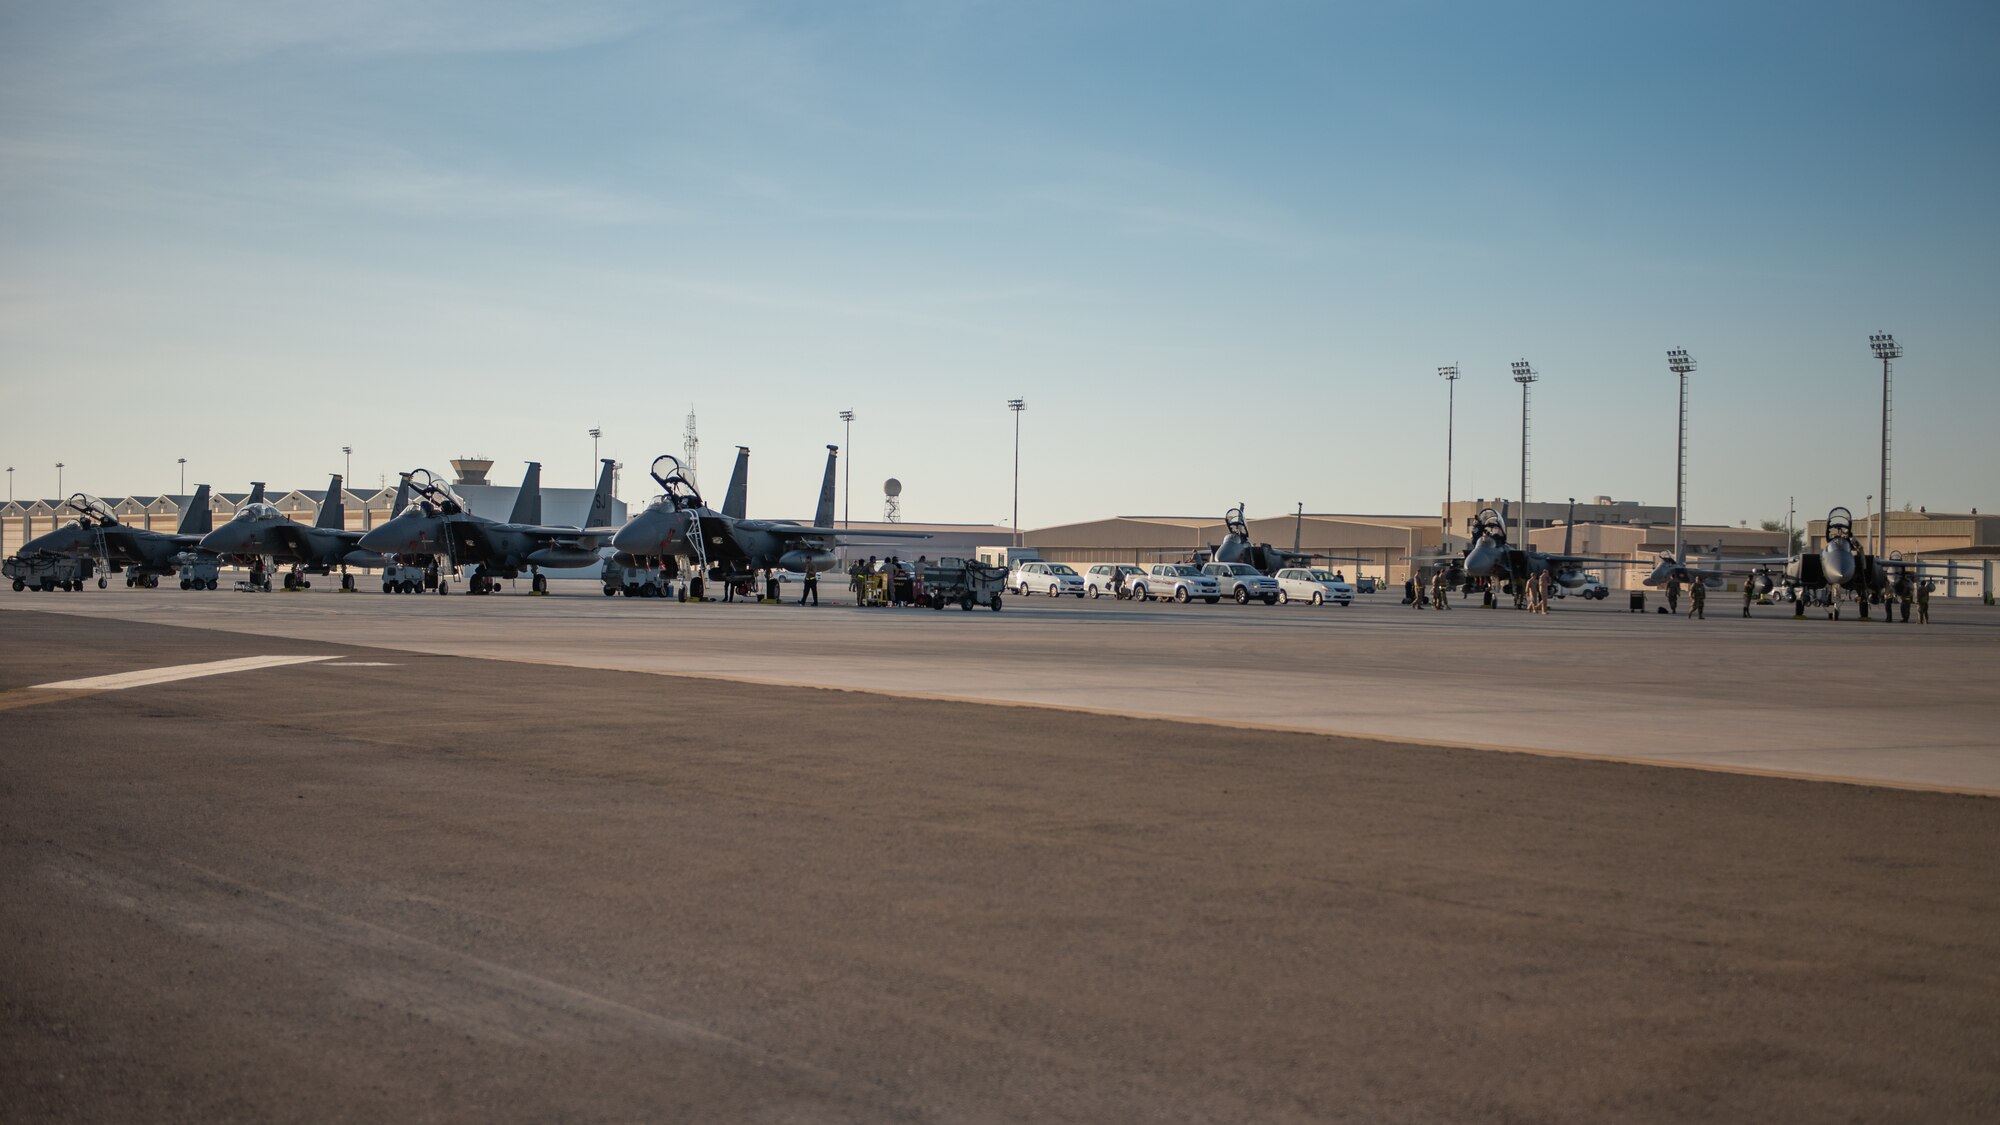 Seven F-15E Strike Eagles from the 336th Fighter Squadron, 4th Fighter Wing at Seymour Johnson Air Force Base, North Carolina sit on the airfield at Al Dhafra Air Base, United Arab Emirates, June 14, 2019. The F-15E’s joined ADABs inventory of other fighters to include F-15C Eagles and F-35A Lightning IIs. (U.S. Air Force photo by Staff Sgt. Chris Thornbury)